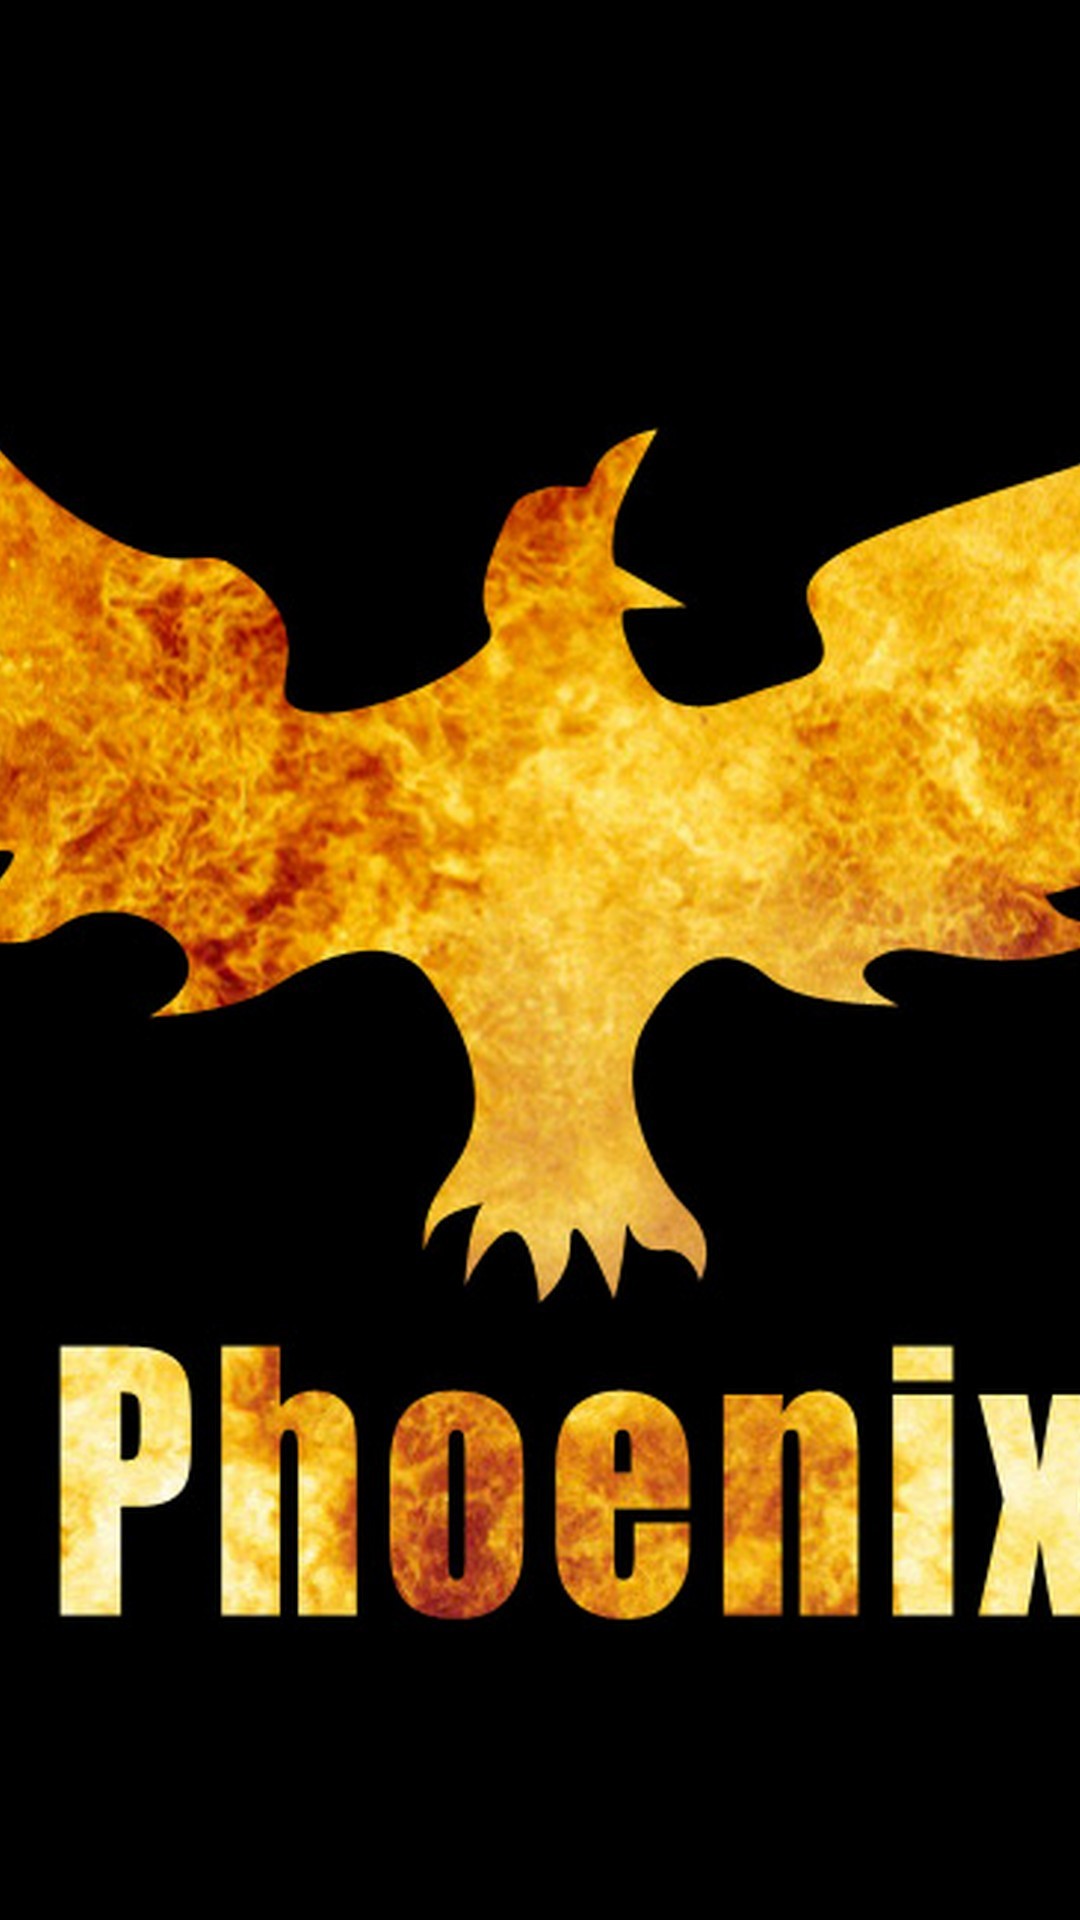 Android Wallpaper HD Phoenix Images with resolution 1080X1920 pixel. You can make this wallpaper for your Android backgrounds, Tablet, Smartphones Screensavers and Mobile Phone Lock Screen